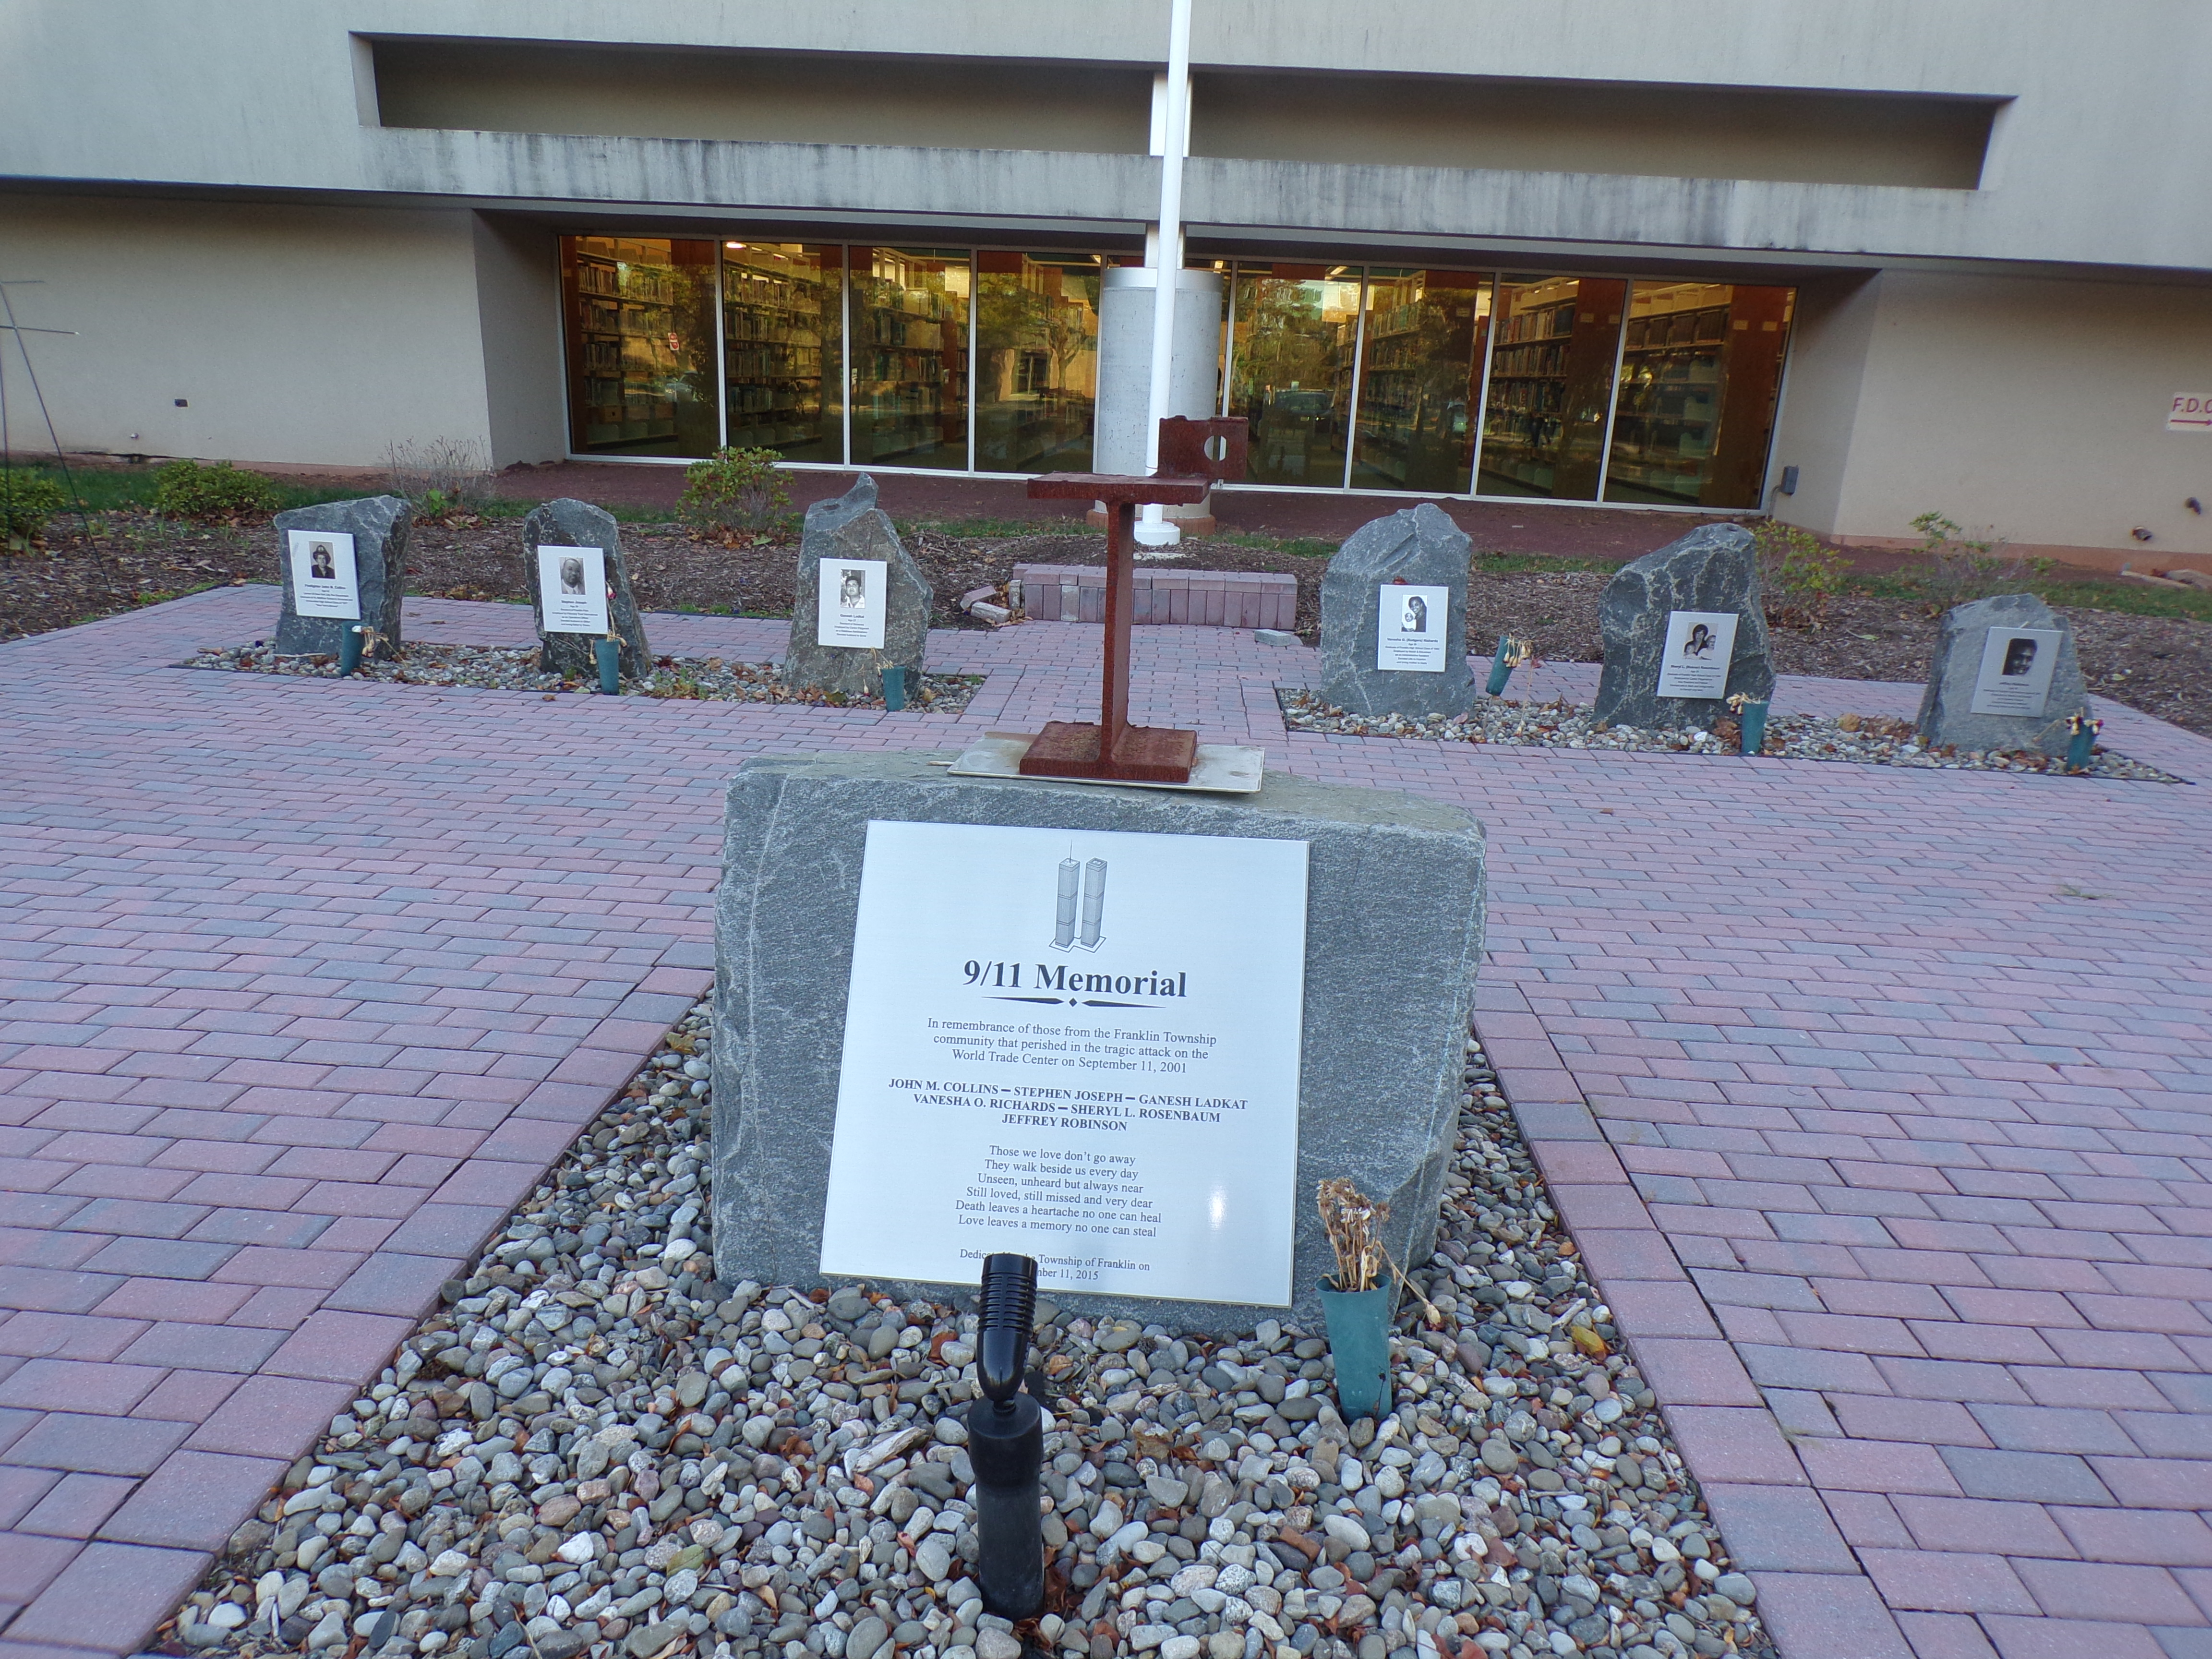 Franklin Twp.'s 9/11 memorial at the municipal complex.